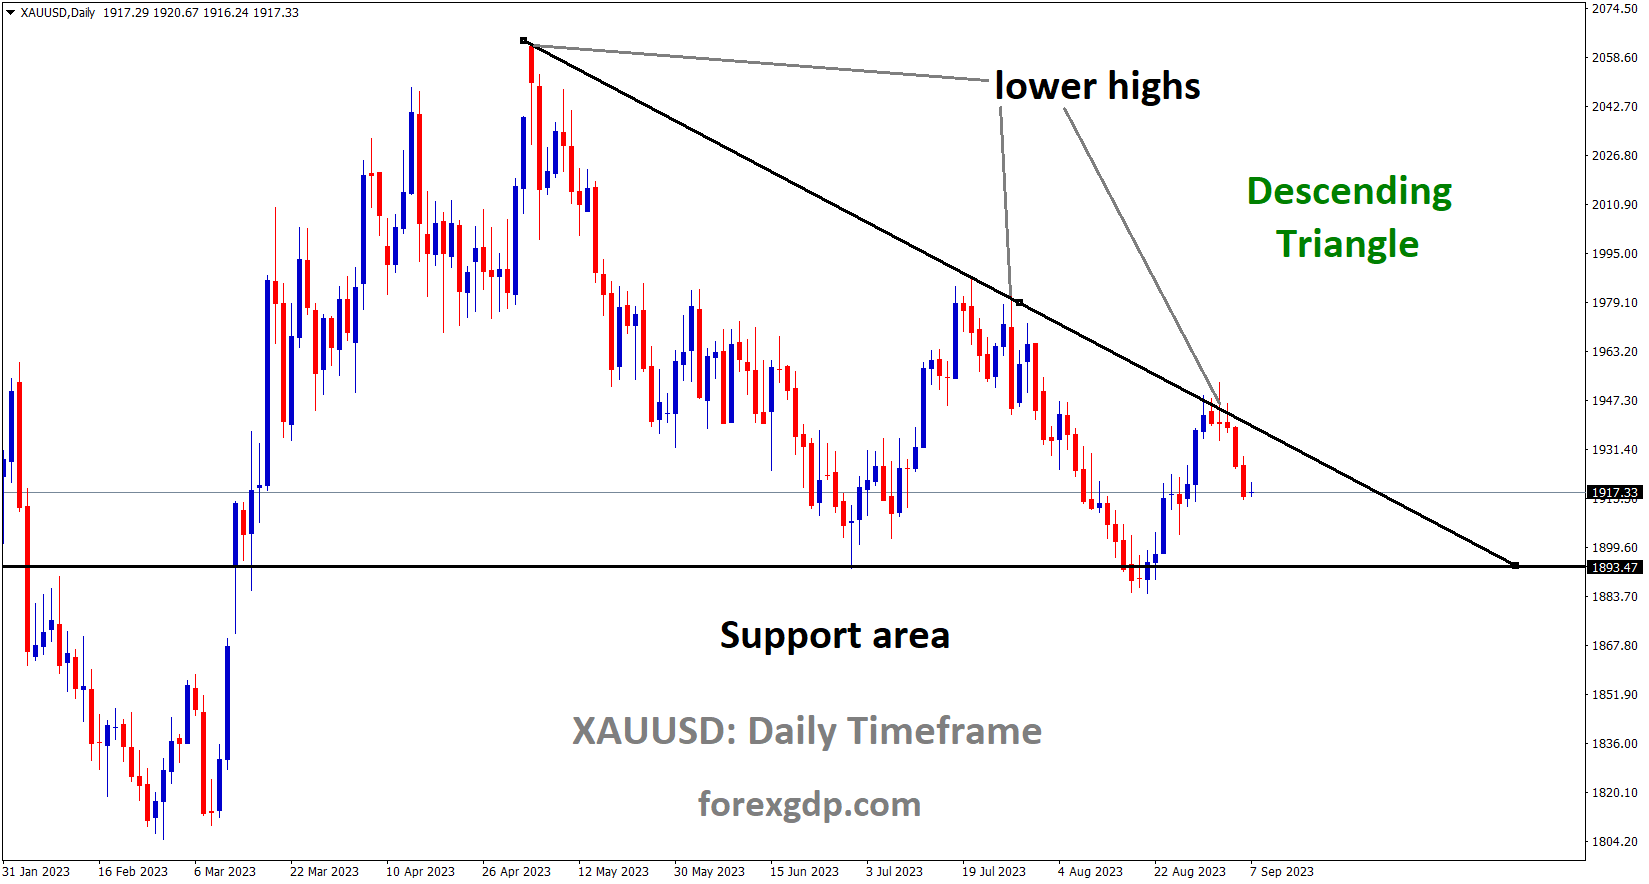 XAUUSD Gold price is moving in the Descending triangle pattern and the market has fallen from the lower high area of the pattern.